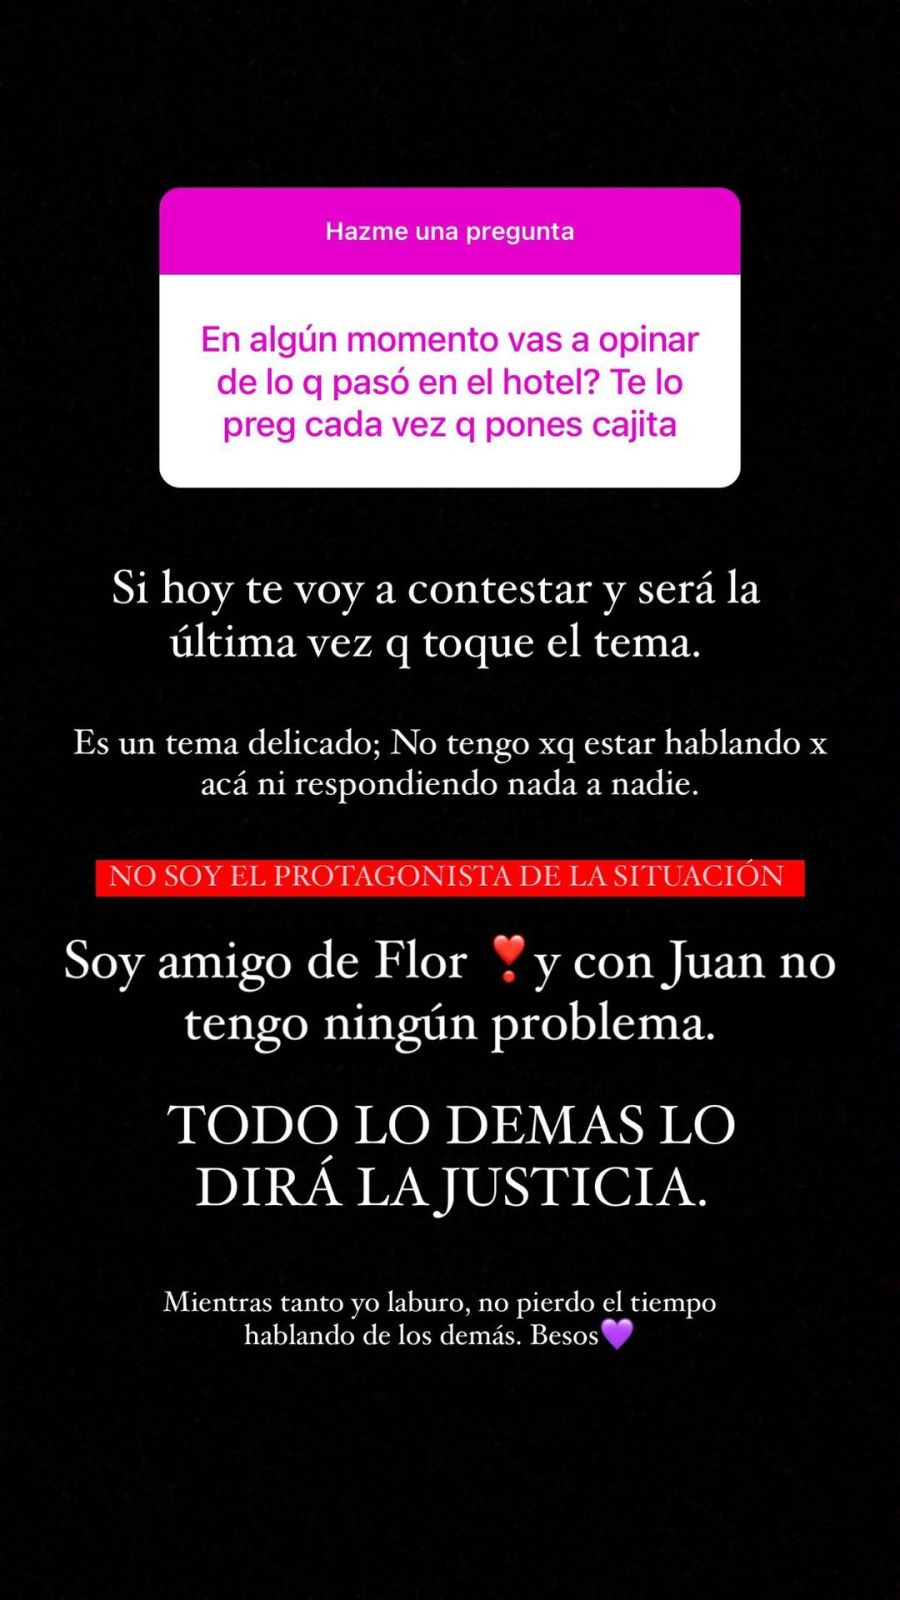 Flor Moyano met with her colleagues from El Hotel de los Famosos in the middle of the complaint against Juan Martino